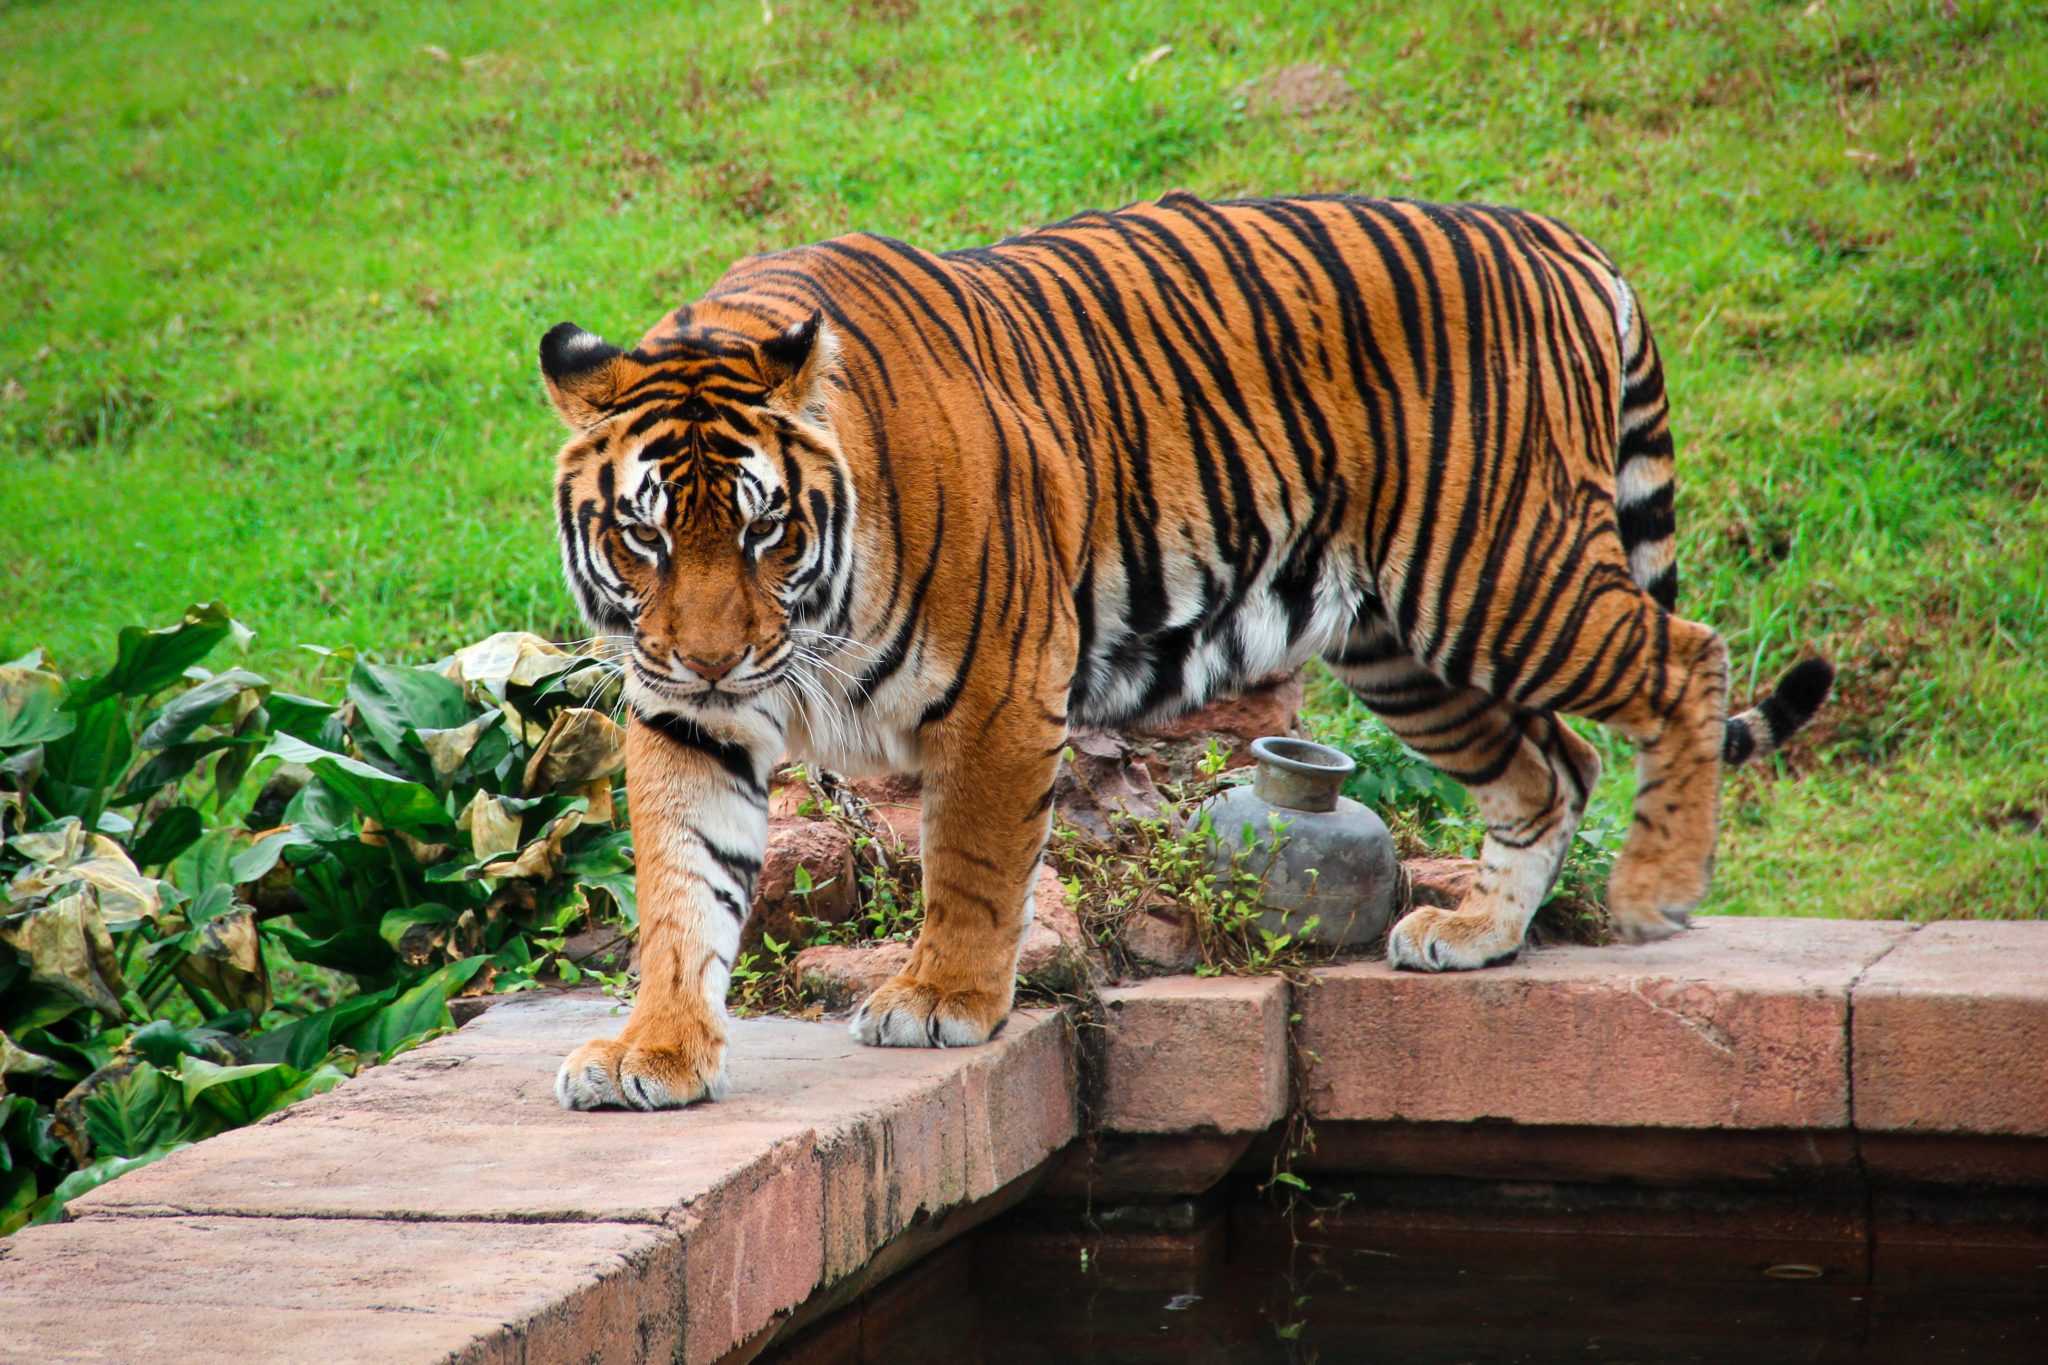 Tiger walking at the edge of a pool of water